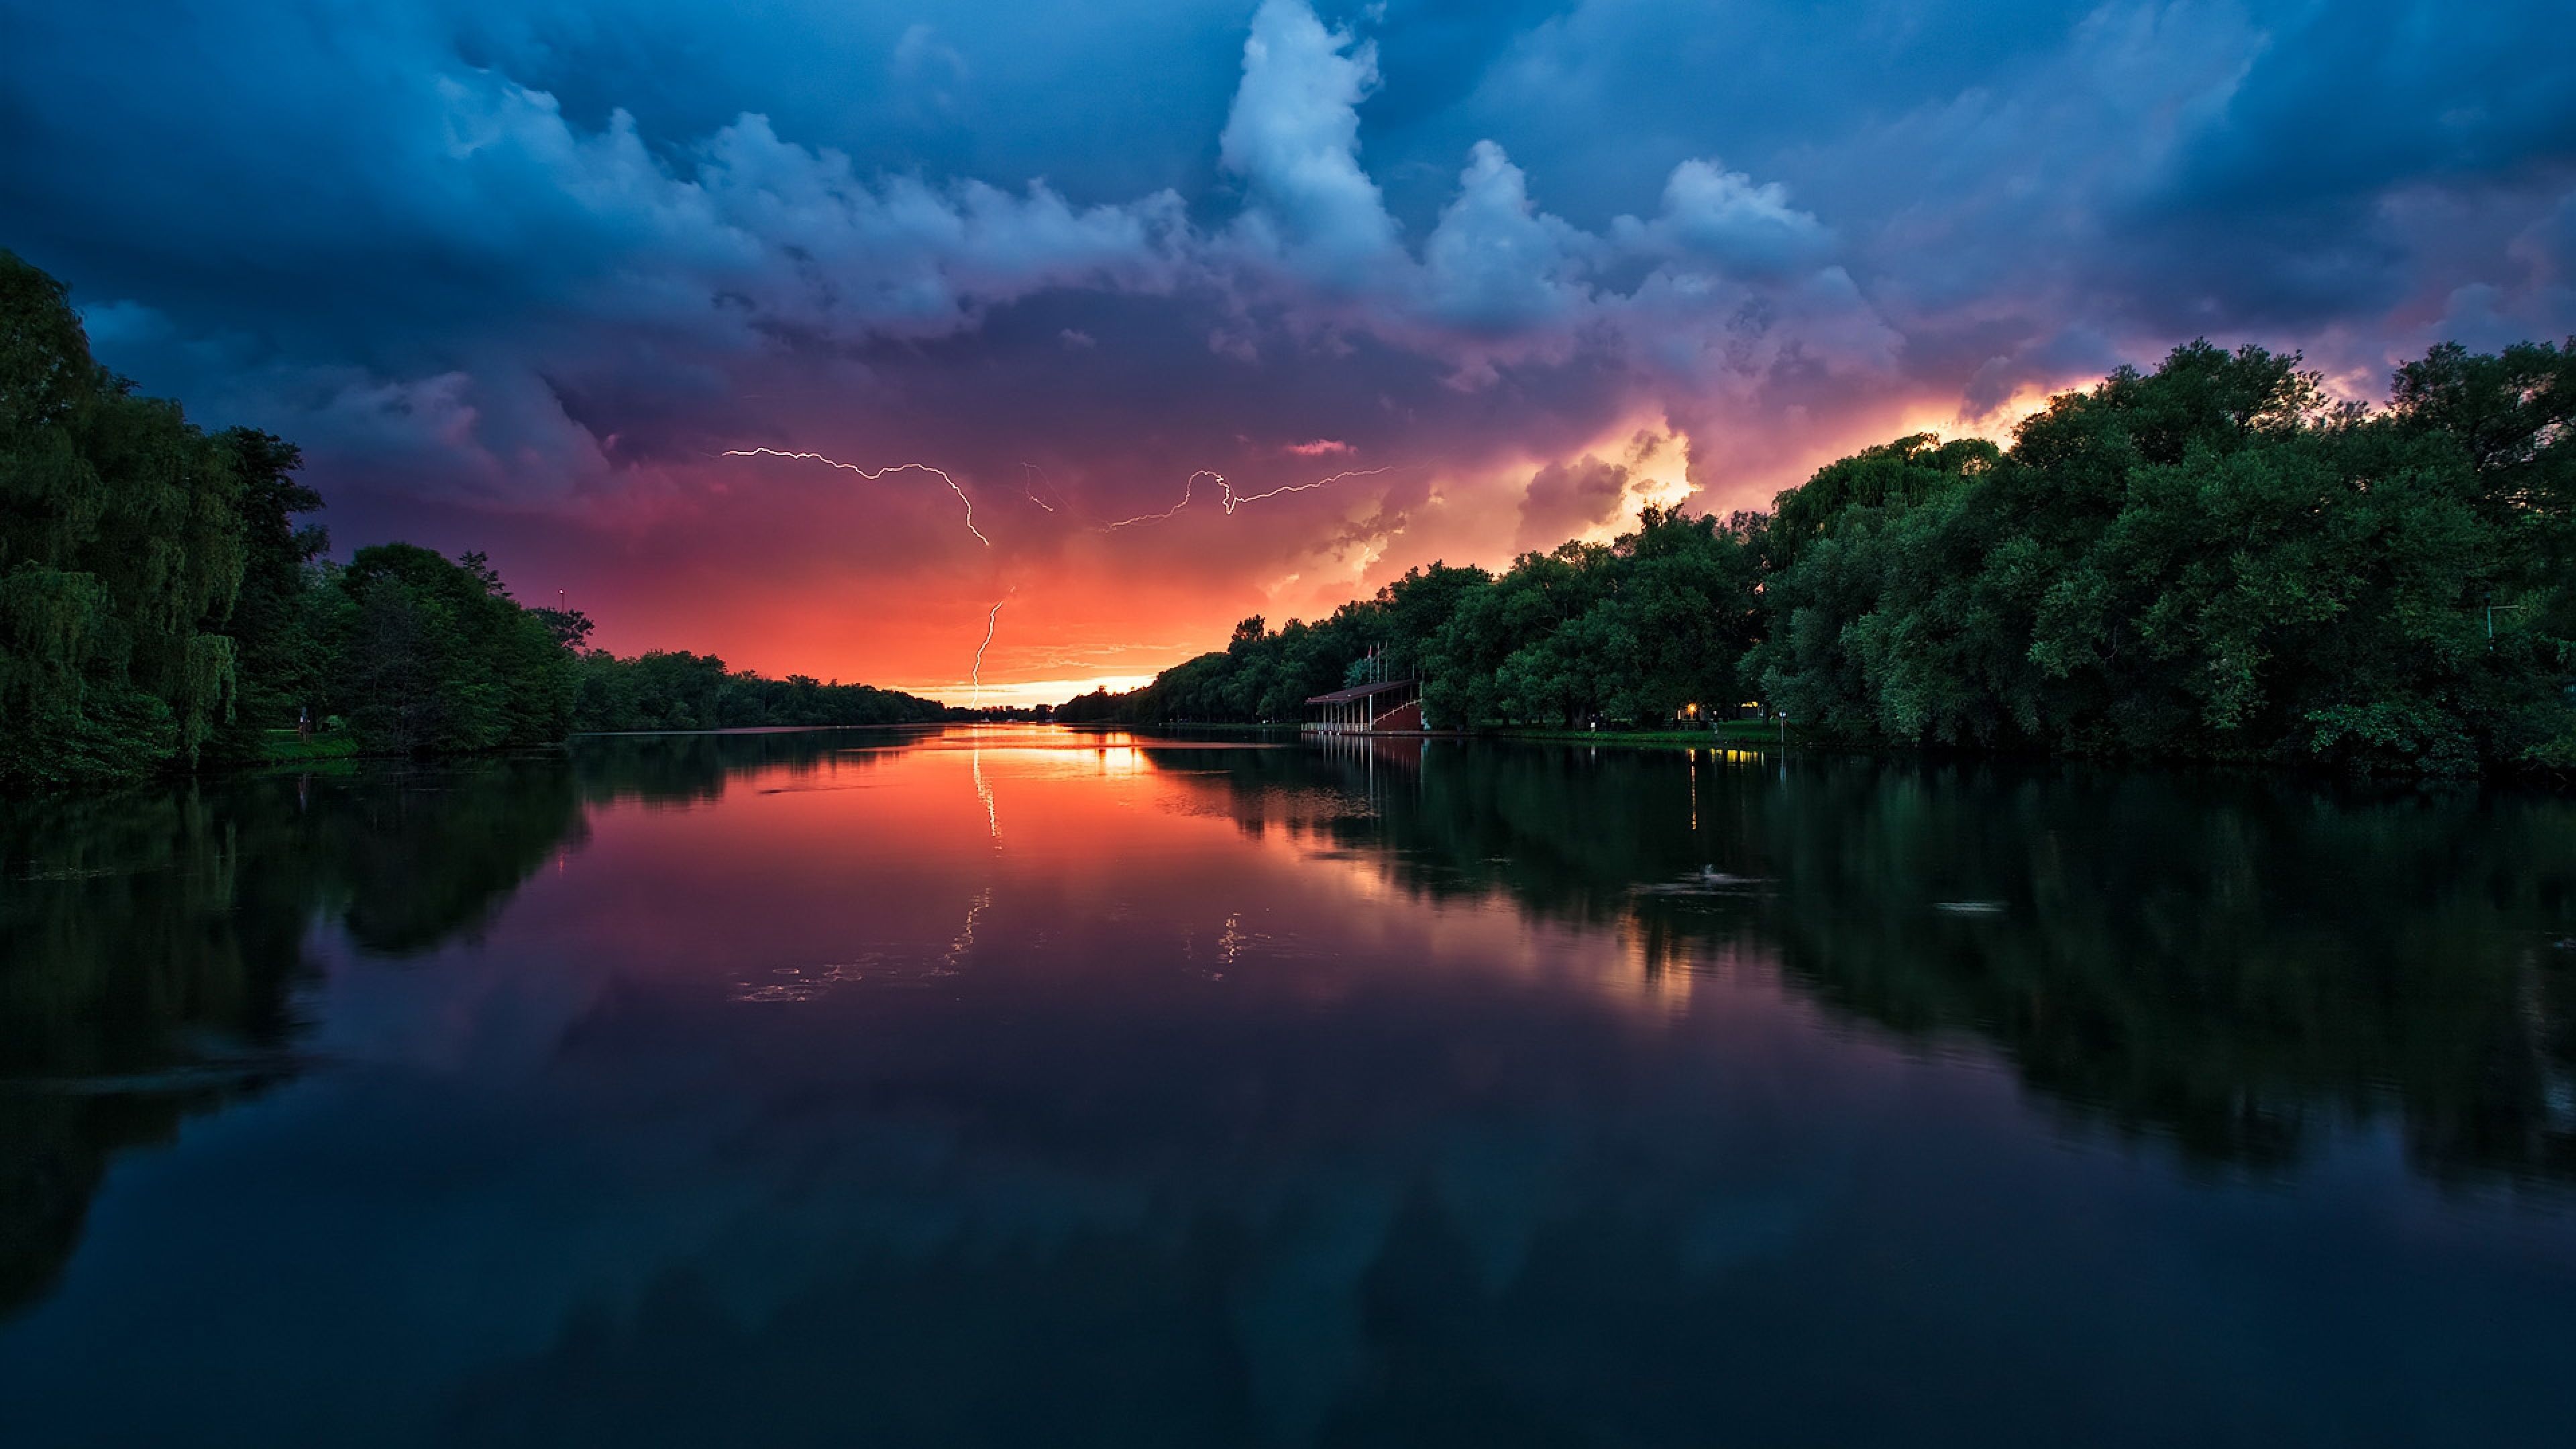 Download Wallpaper 3840x2160 Clouds, Thunder-storm, River ...